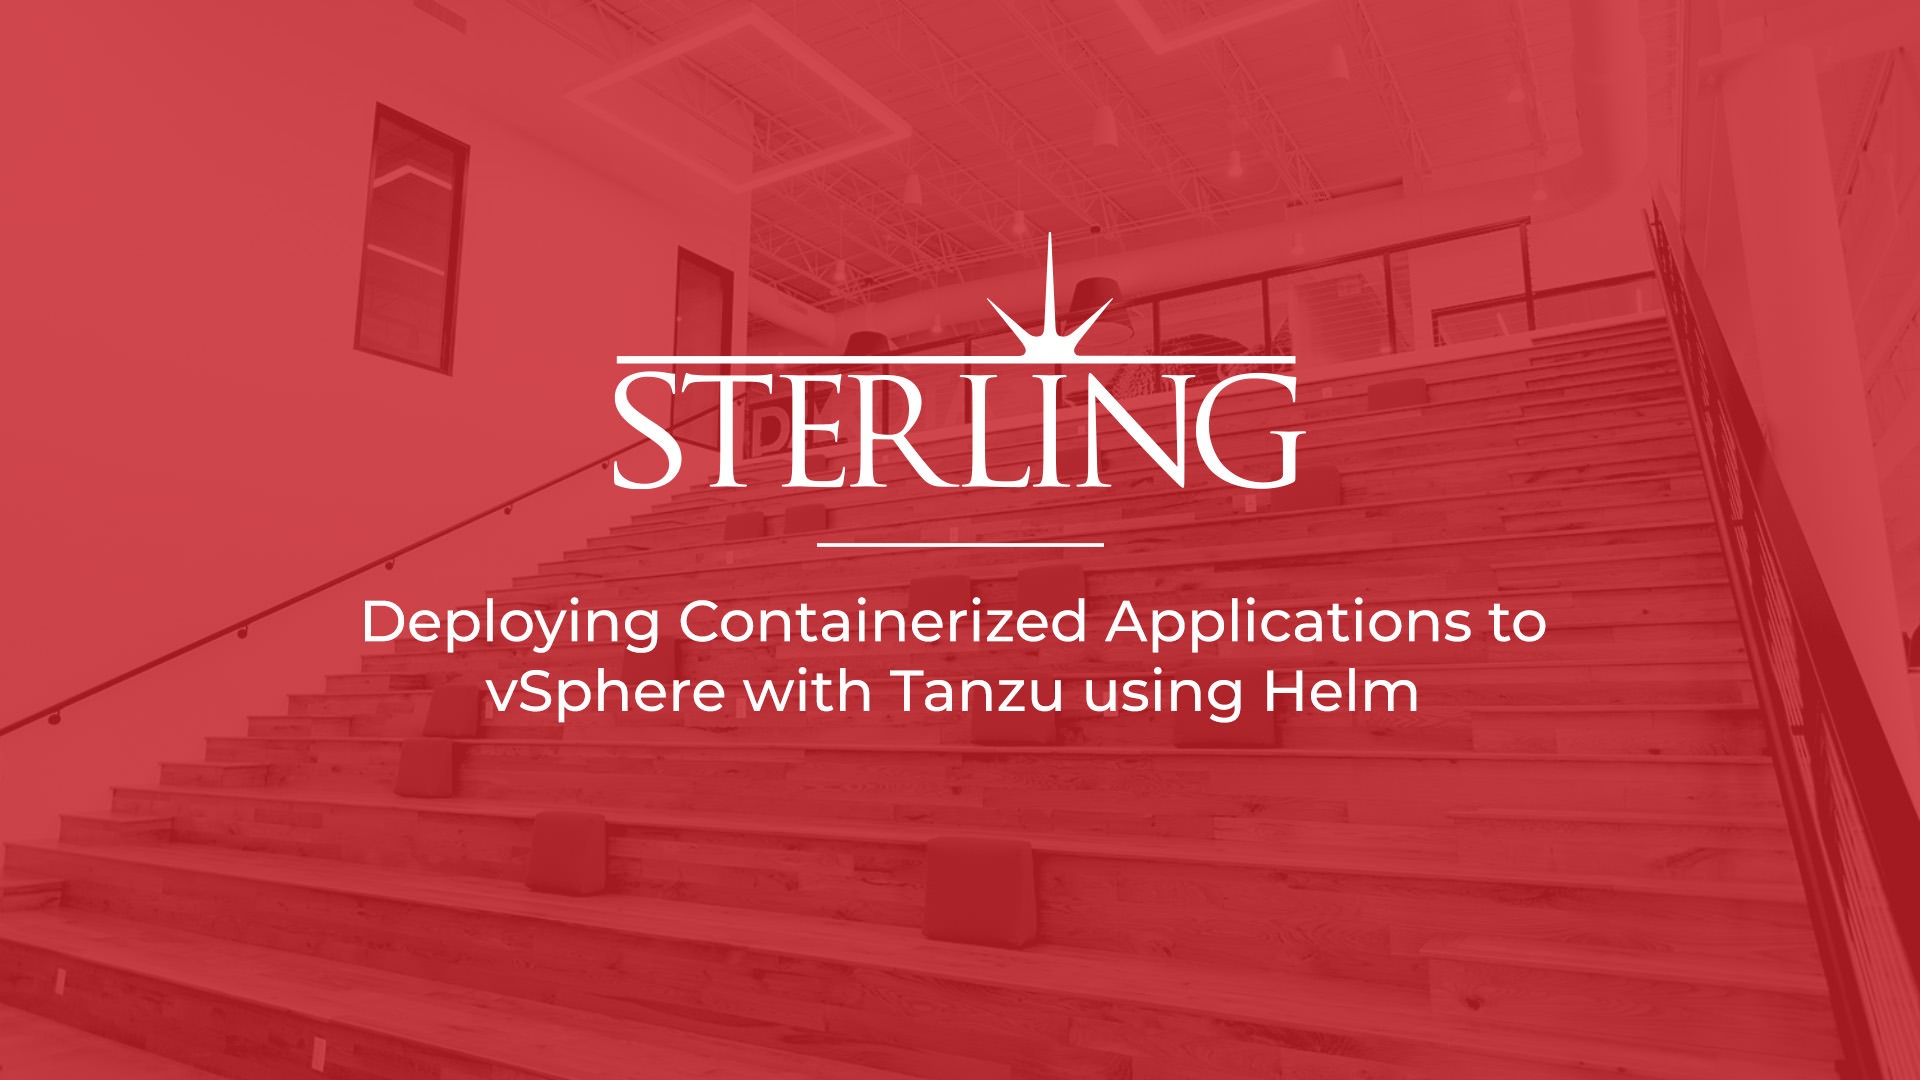 Deploying Containerized Applications to vSphere with Tanzu using Helm